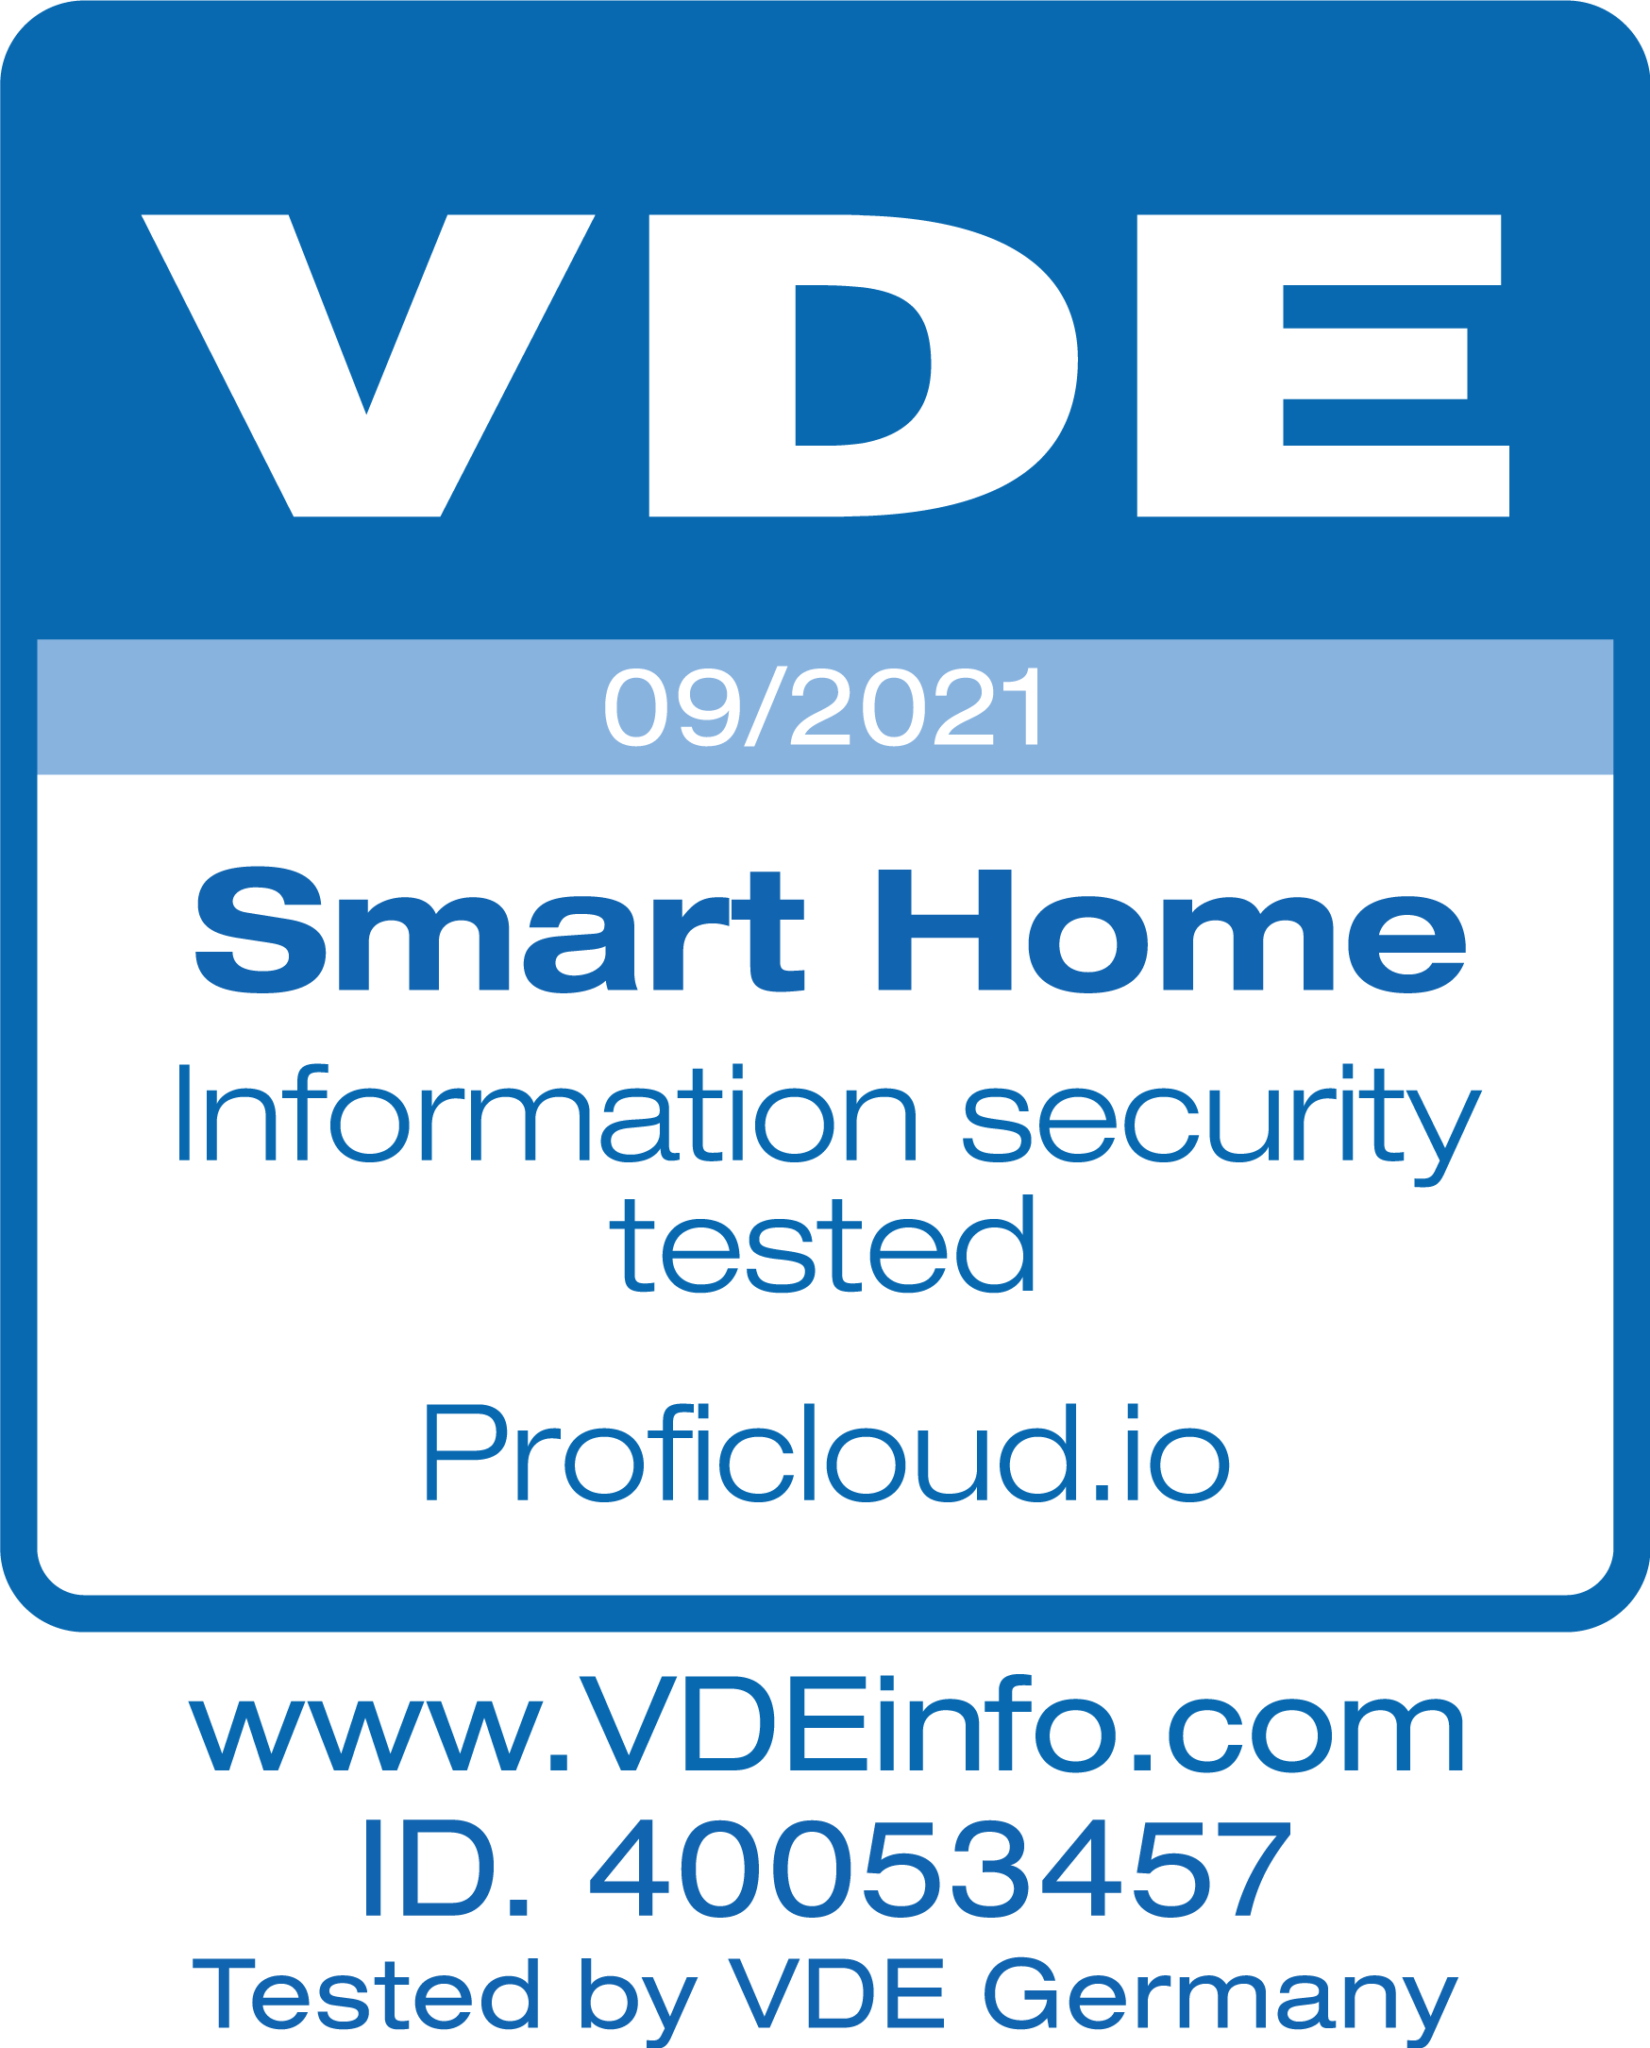 VDE Smart Home - Information security tested - Proficloud.io